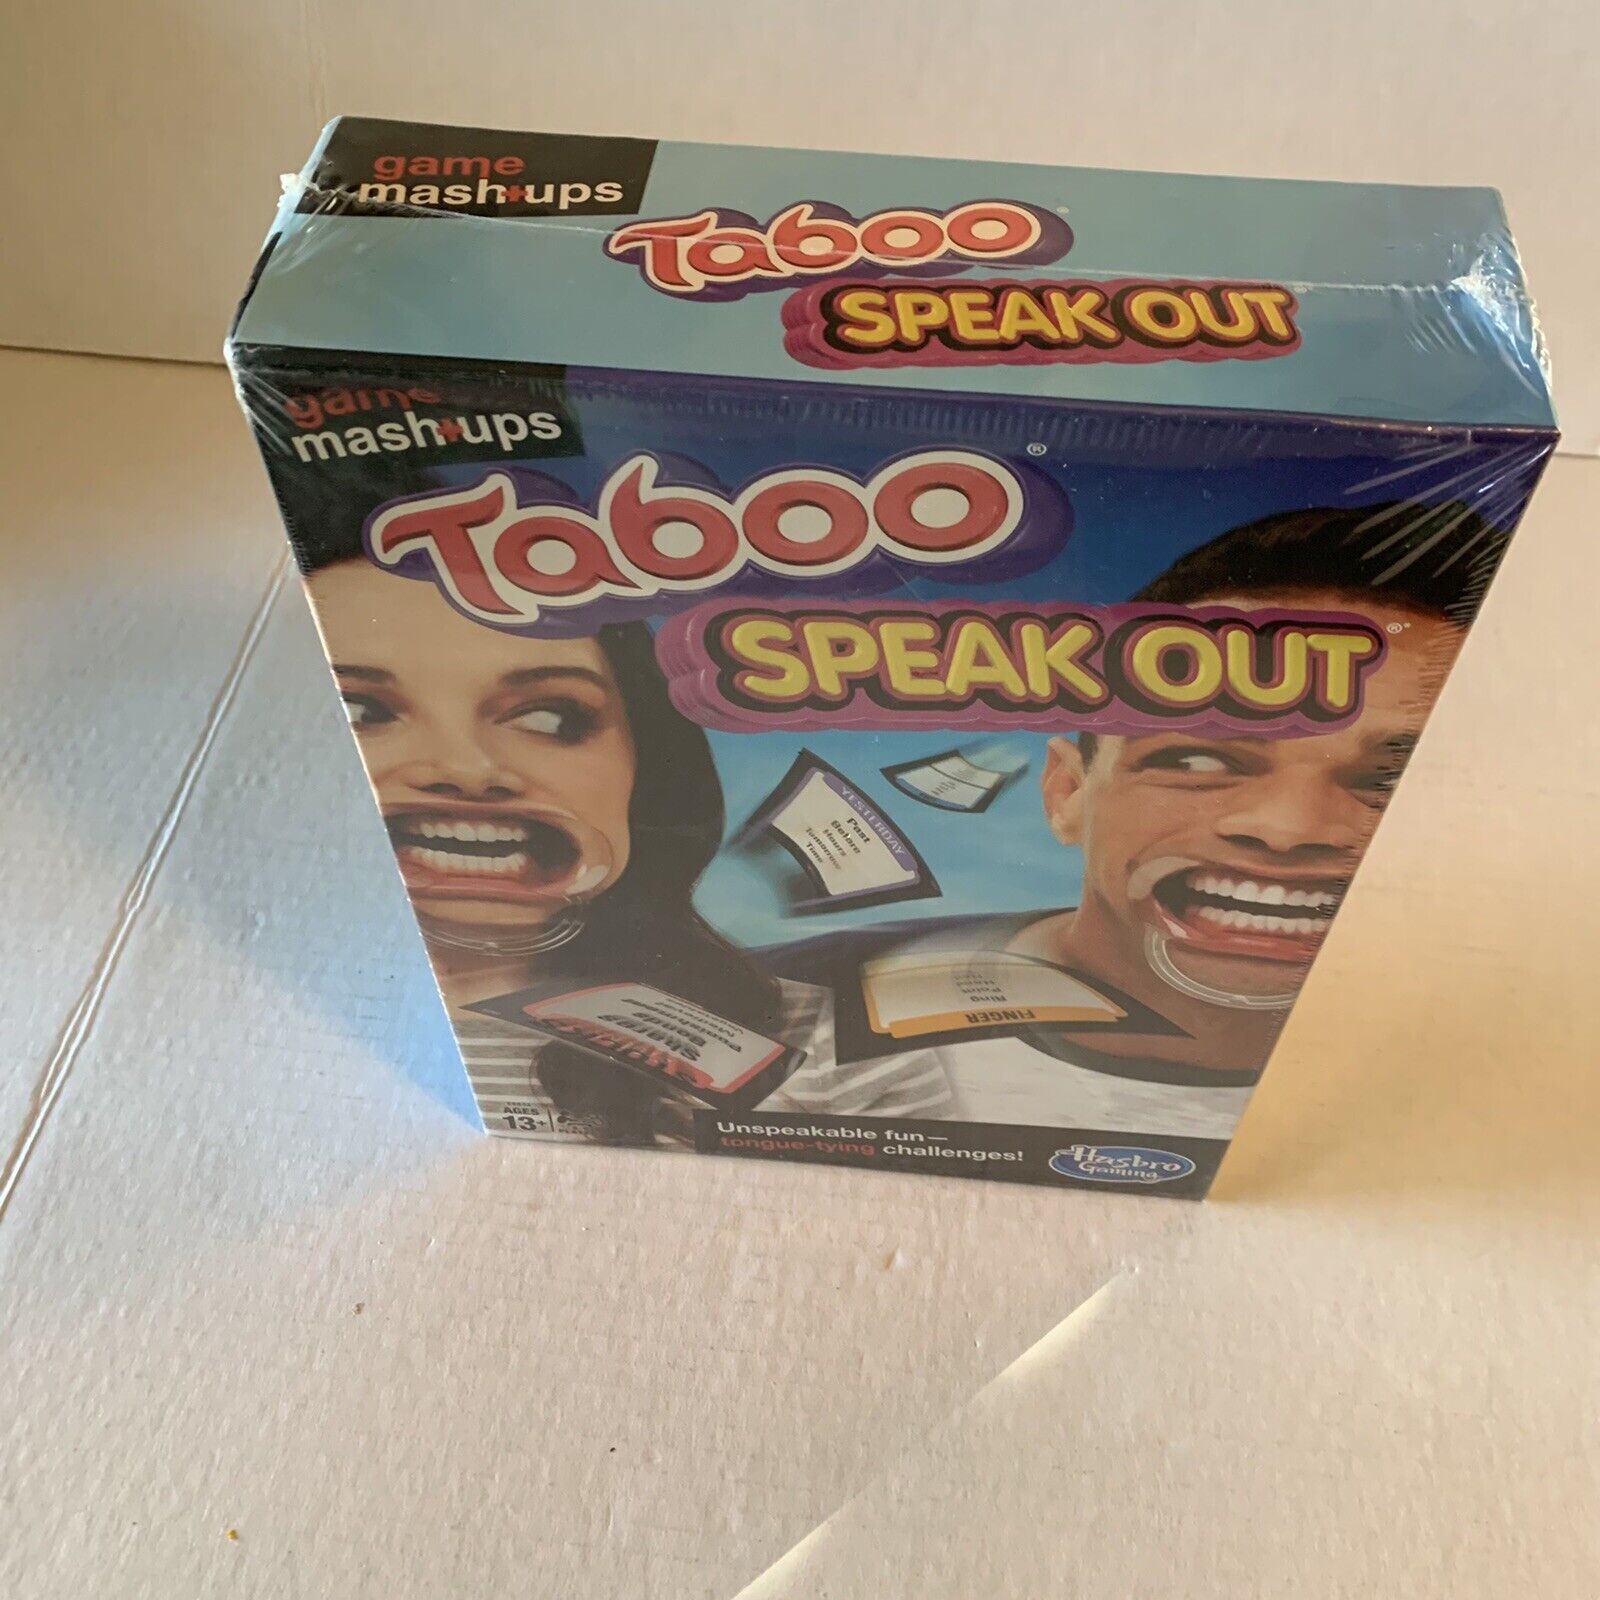 Primary image for Hasbro Game Mashup Taboo Speak Out Party Family Board Game NEW Factory Sealed